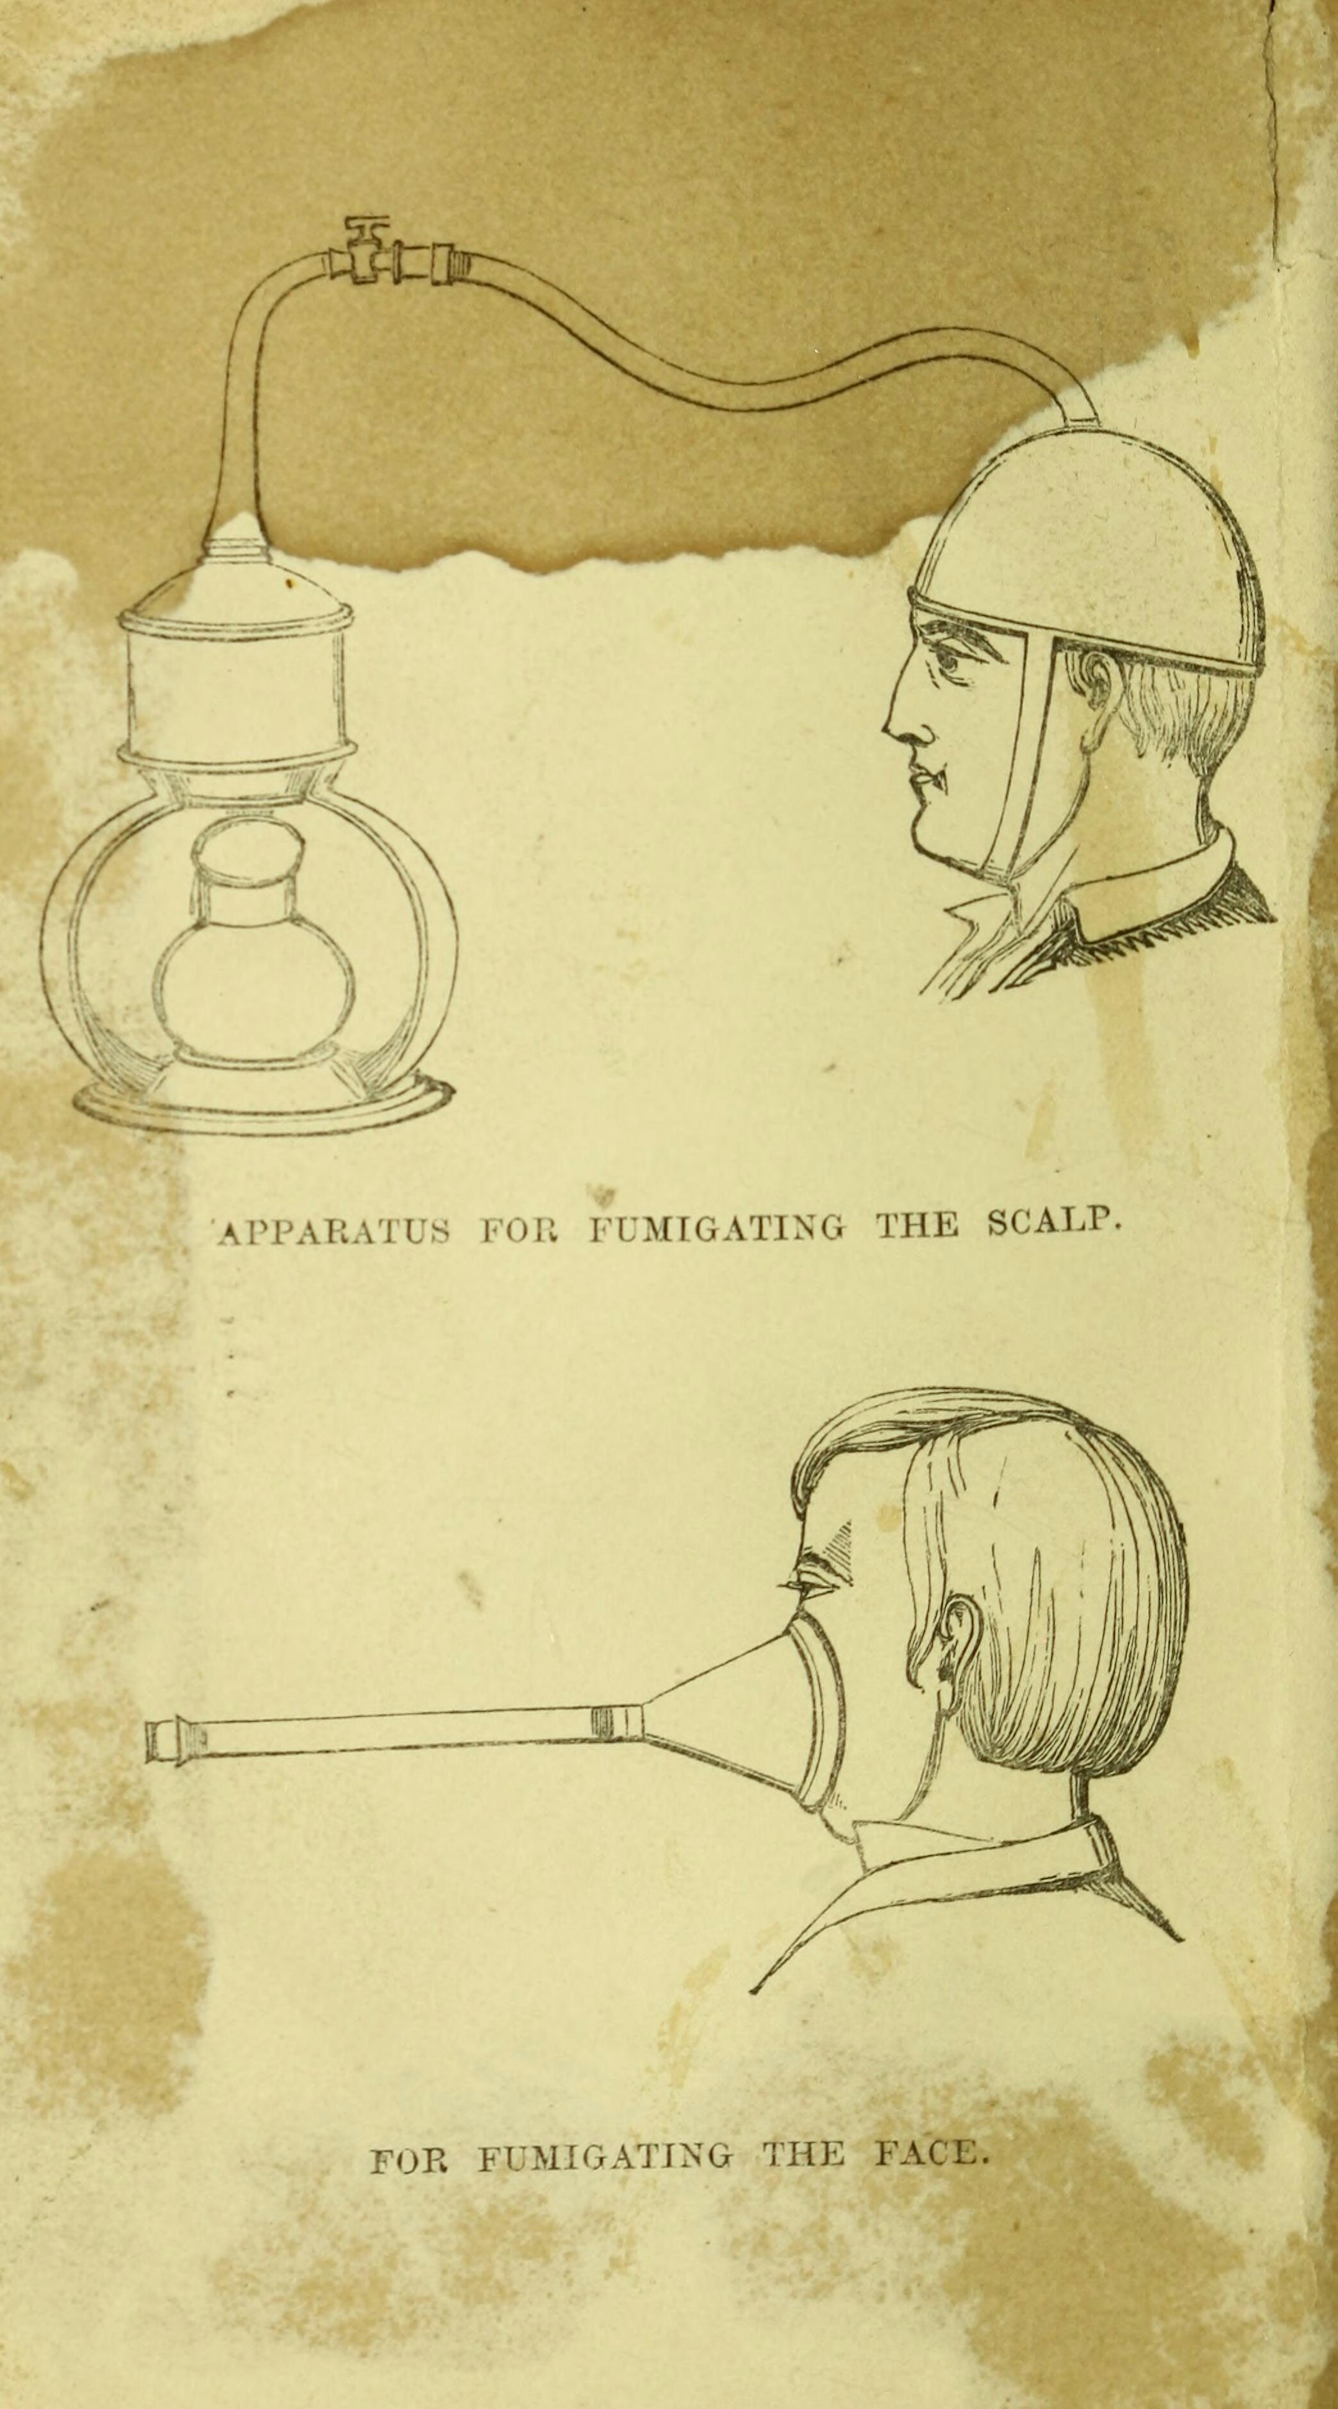 Two monochrome illustrations.  One is labelled 'Apparatus for fumigating the scalp', and shows a gas-lamp shaped apparatus attached with a hose to a cap with chinstrap which covers the head of a man in profile.  The illustration below is labelled 'For fumigating the face', and shows a tube attached to a cone which covers the nose and mouth of a person in profile.